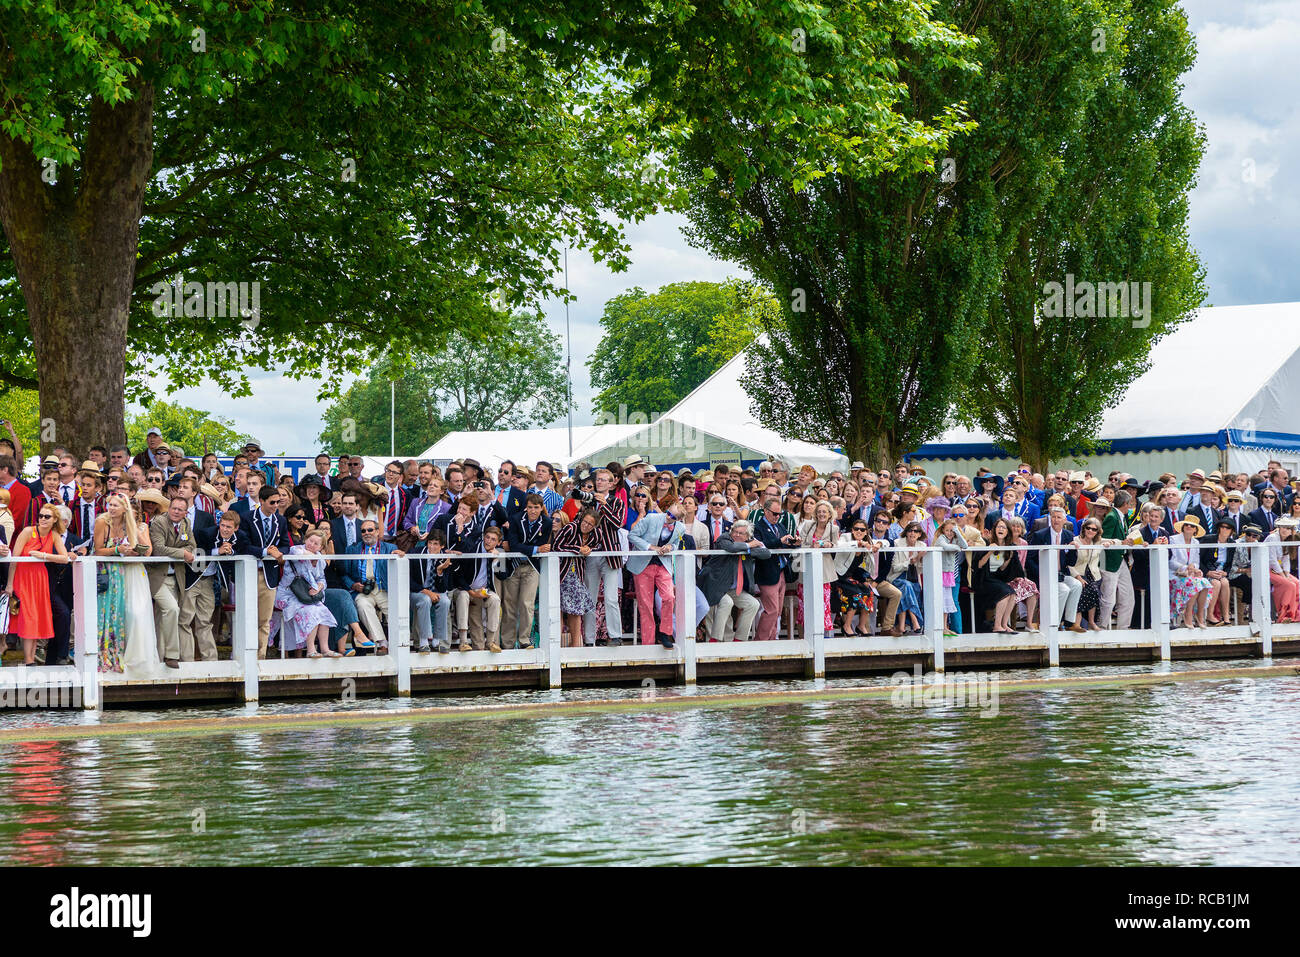 Spectators in the Stewards Enclosure wait for the next rowing race to come past at the Henley Royal Regatta, Henley-on-Thames, England, UK Stock Photo